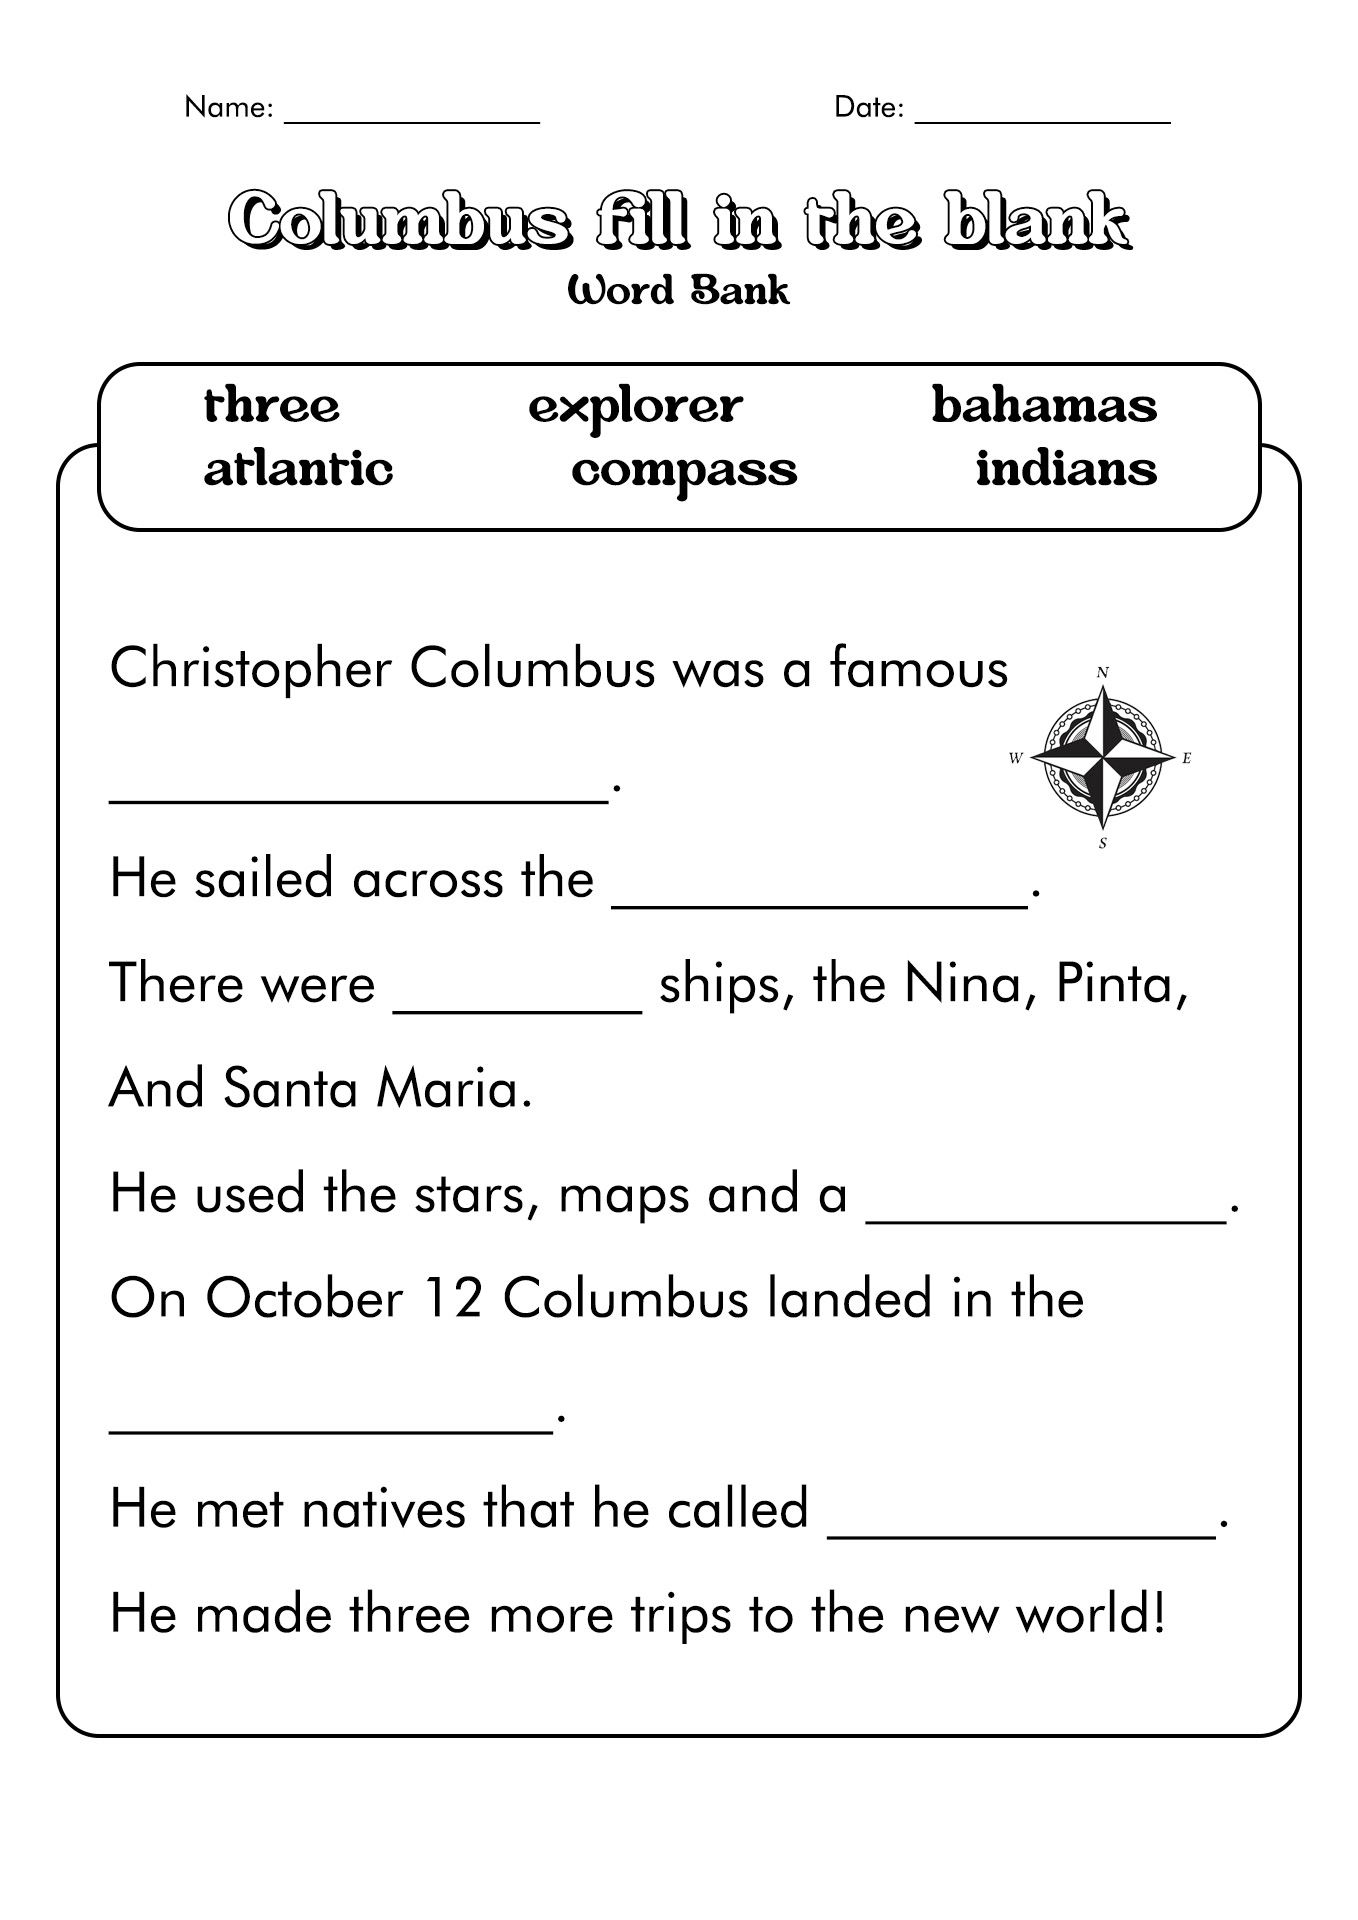 Christopher Columbus Day First Grade Image